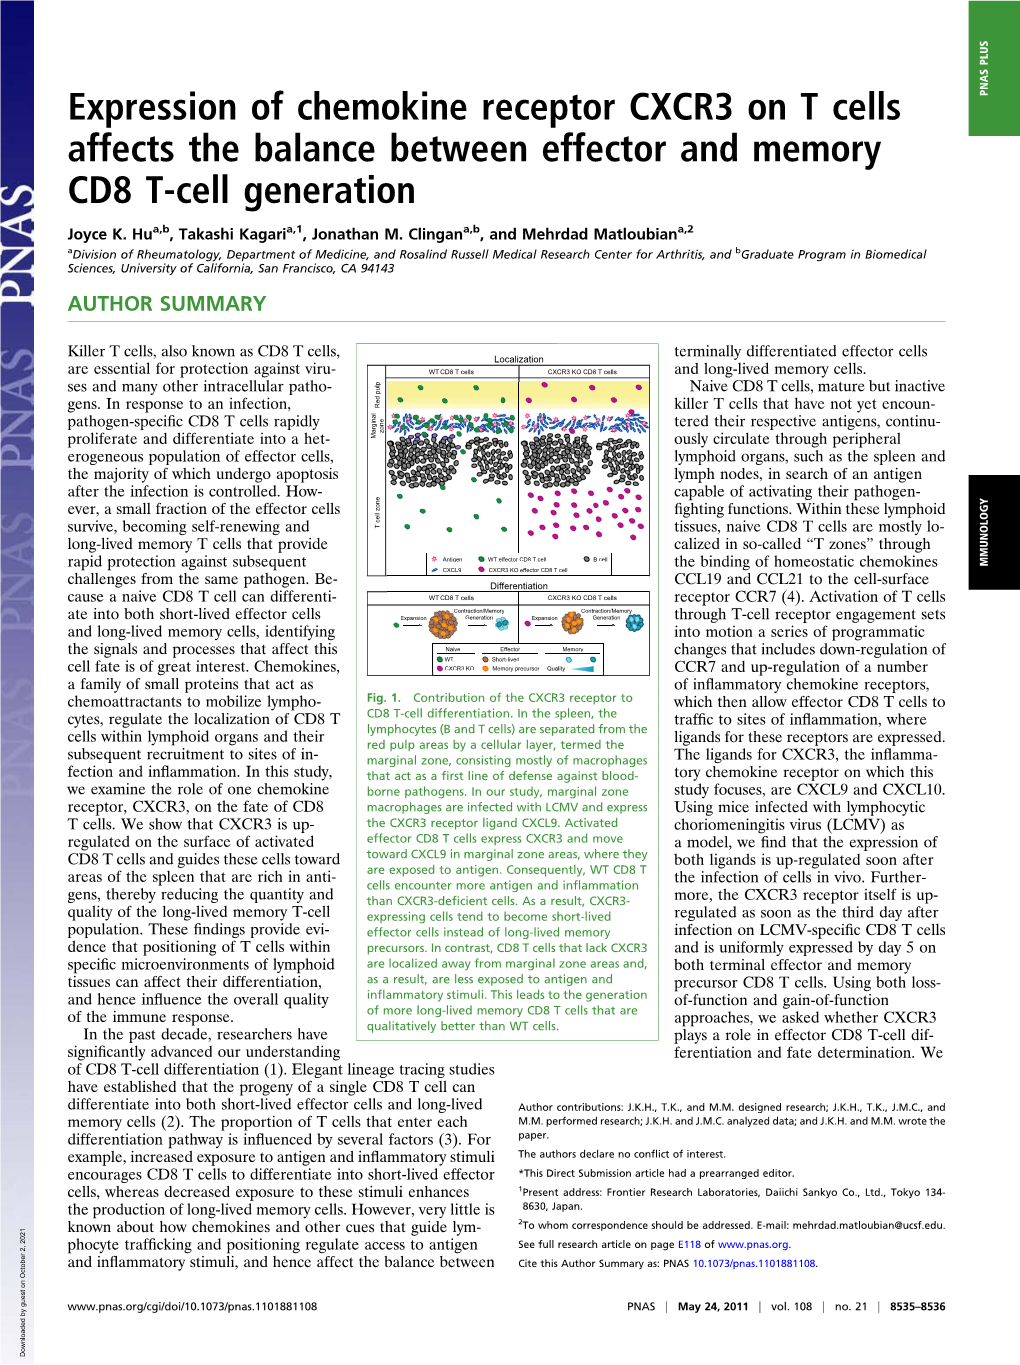 Expression of Chemokine Receptor CXCR3 on T Cells Affects the Balance Between Effector and Memory CD8 T-Cell Generation